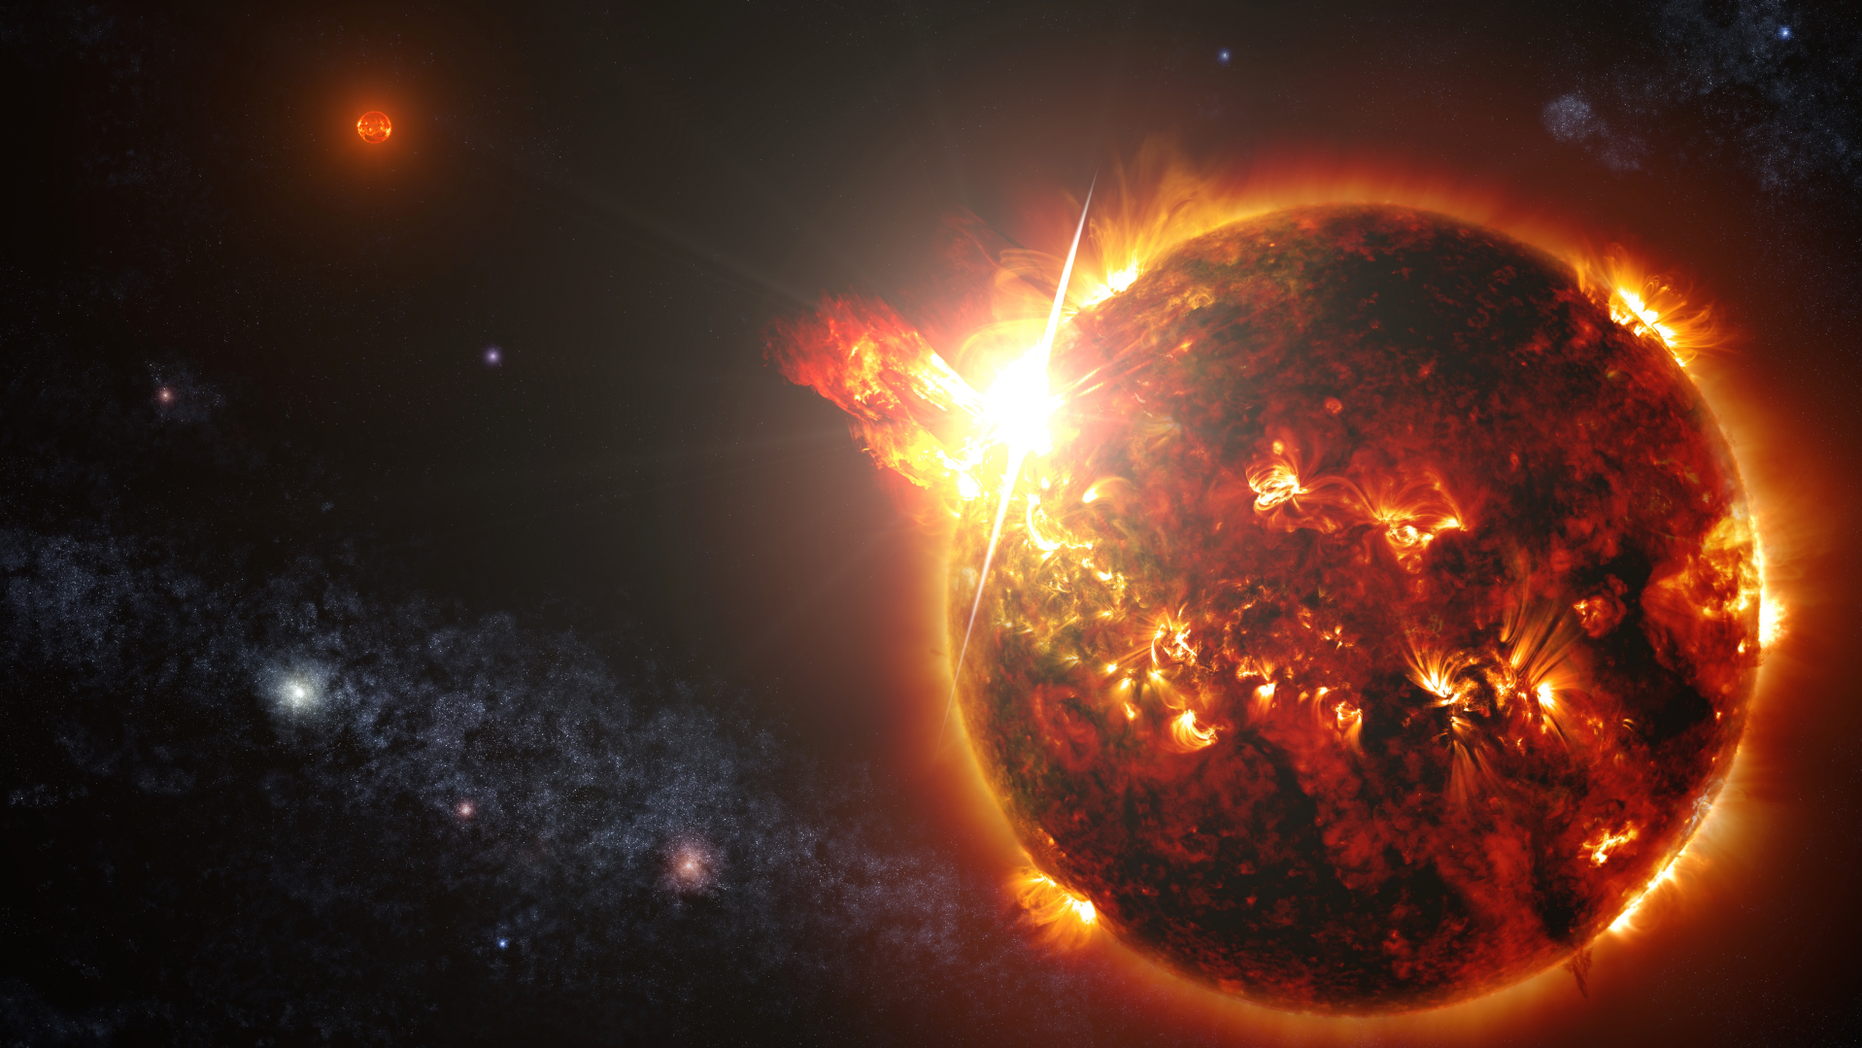 An artist's depiction of a stellar flare in a distant star system.